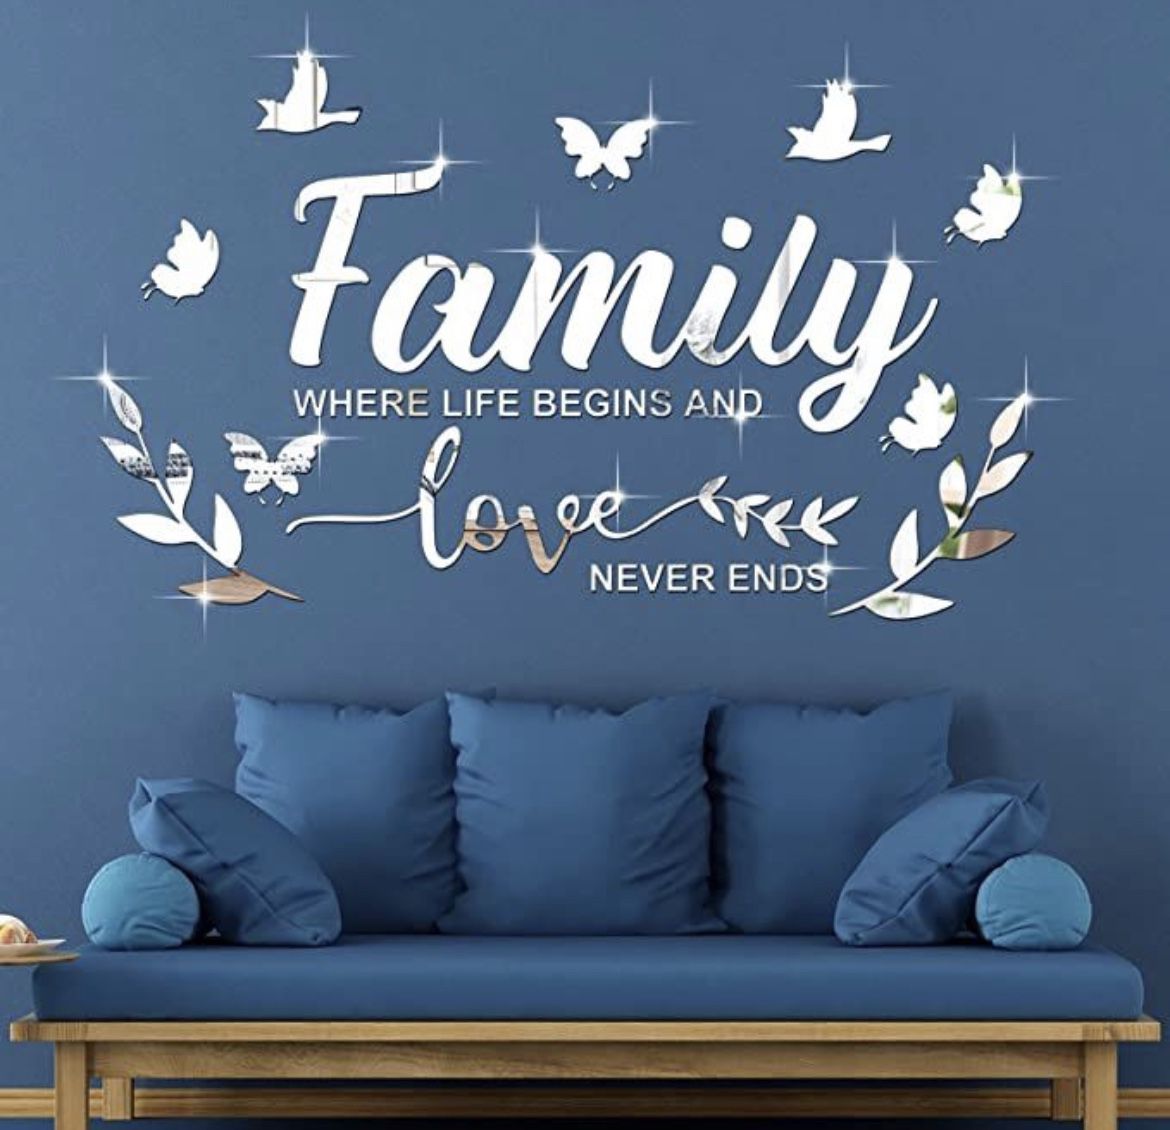 3D Acrylic Mirror Wall Decal Stickers Family Letter Quotes Acrylic Mirror Decor Removable Wall Art Decals DIY Motivational Butterfly Mural Stickers fo